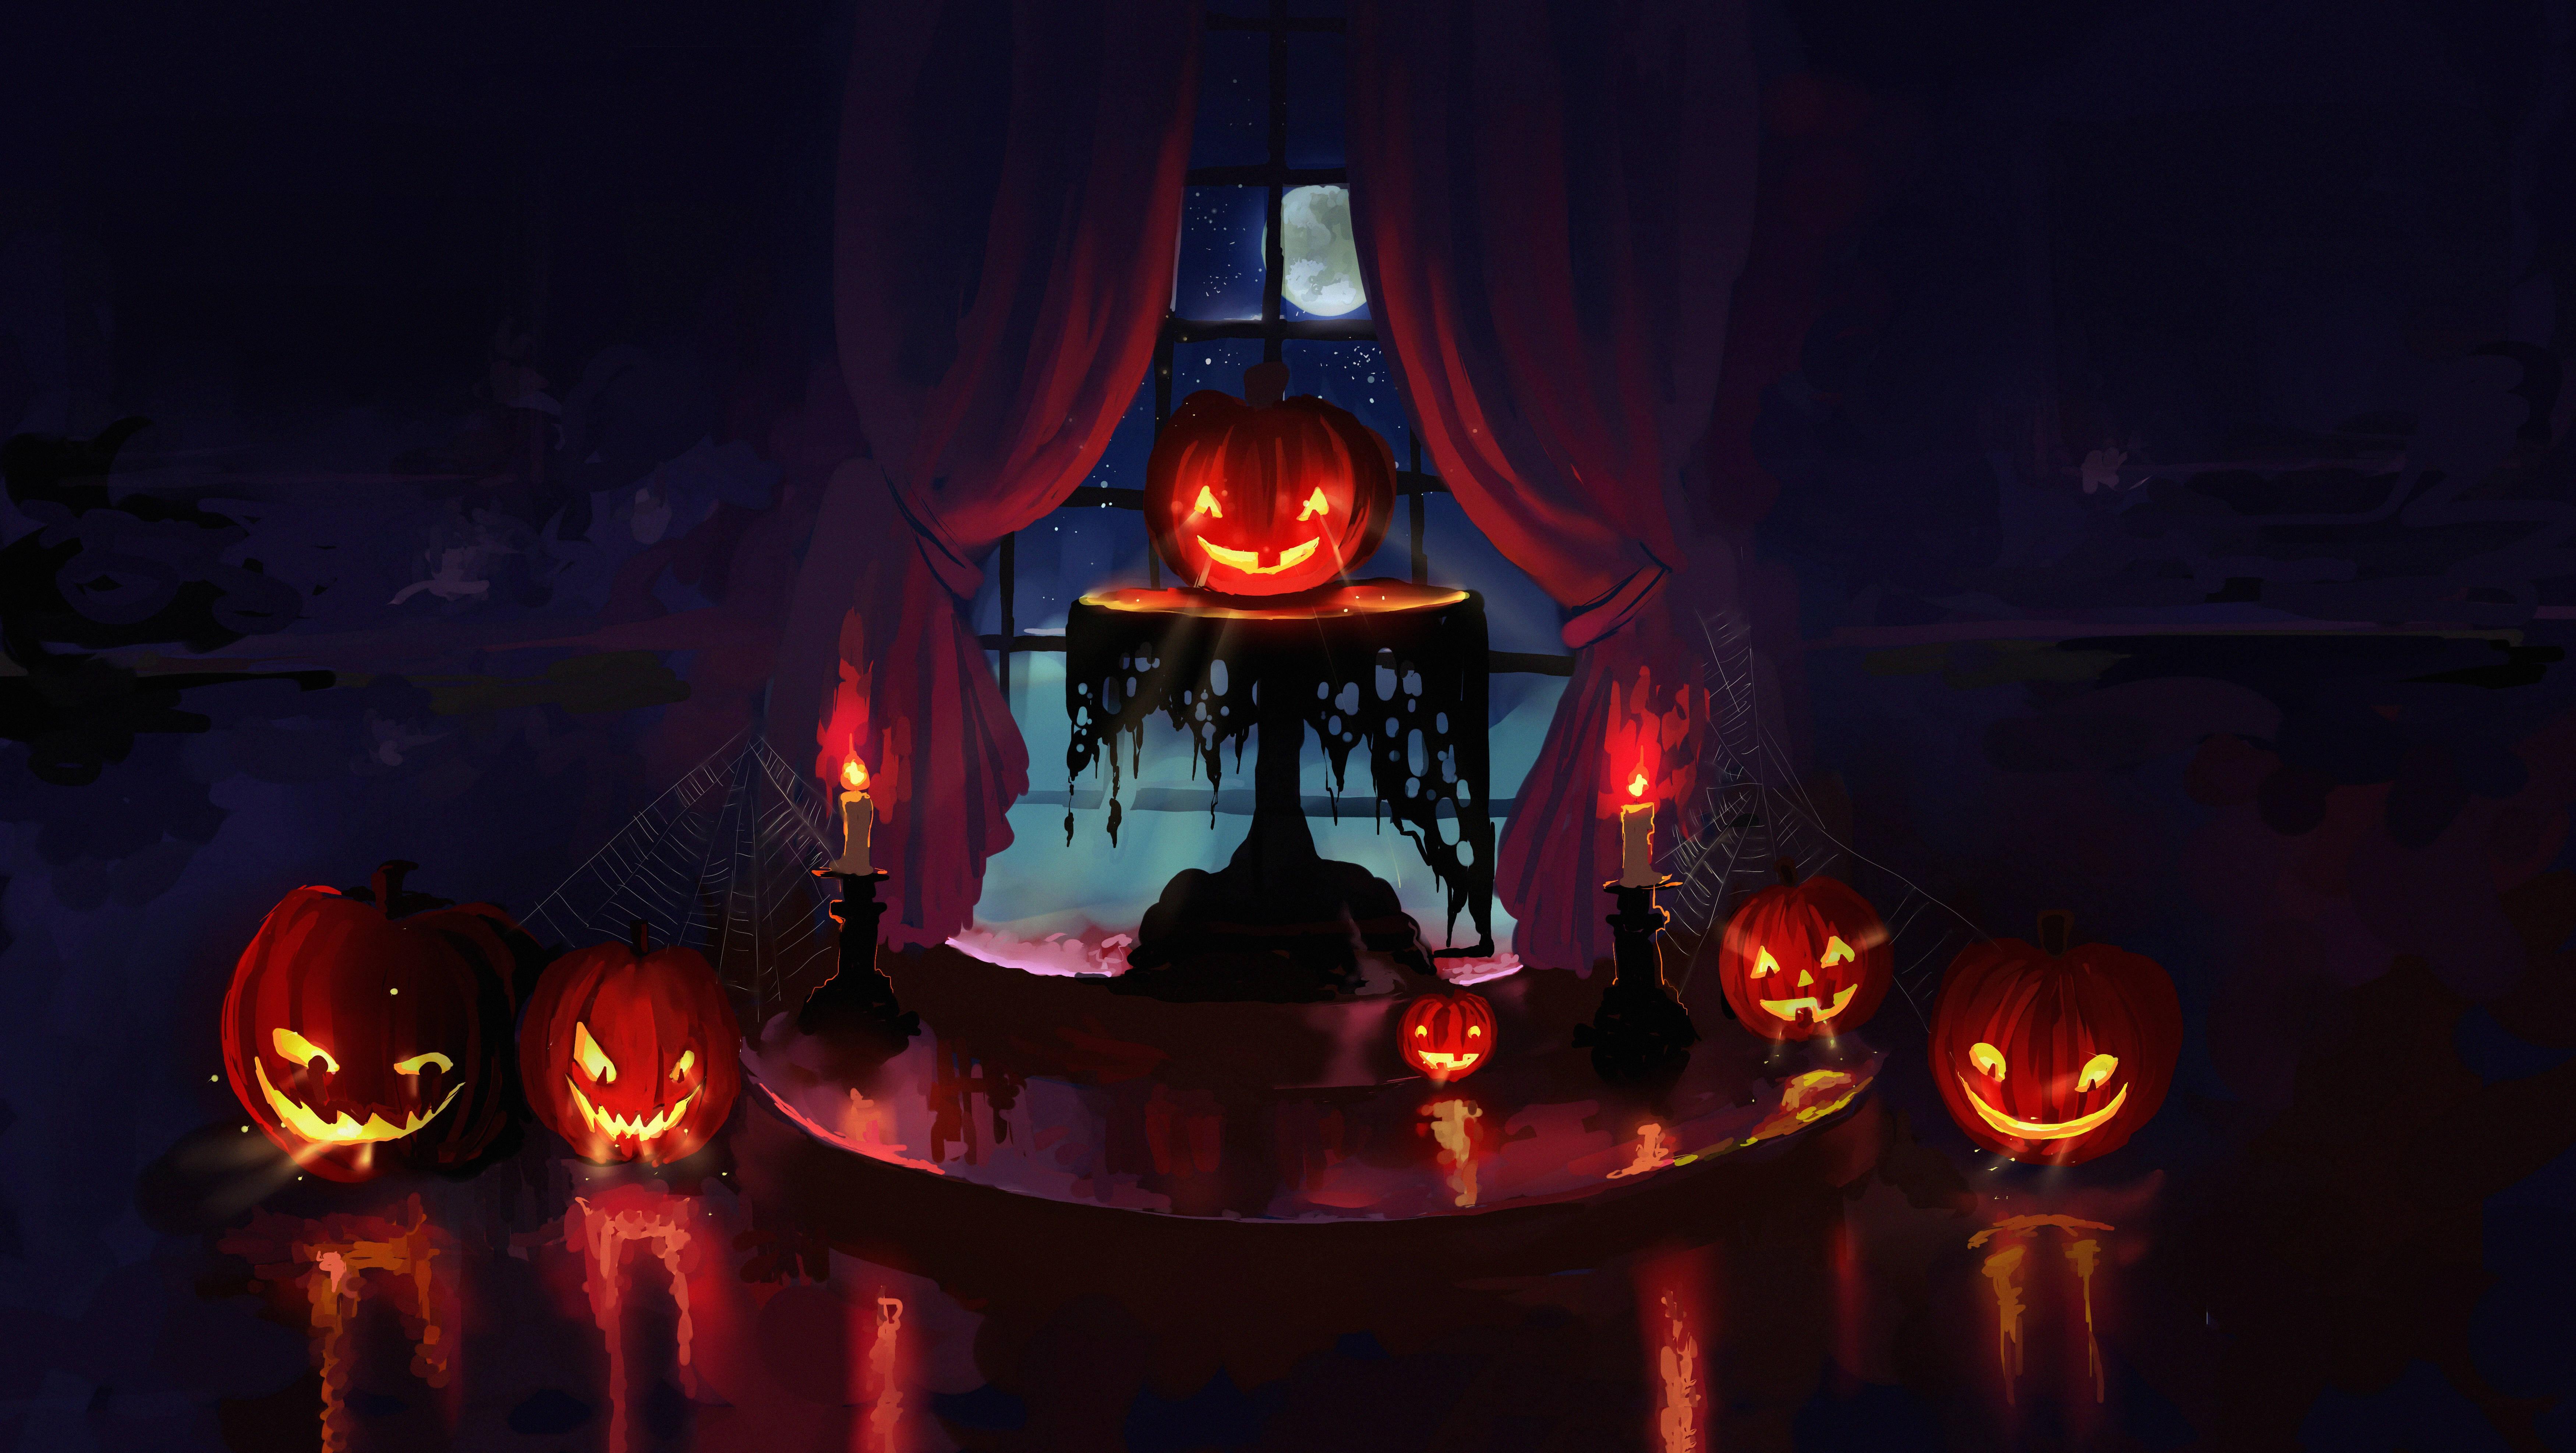 Download A Chilling Halloween Scene featuring Pumpkins and